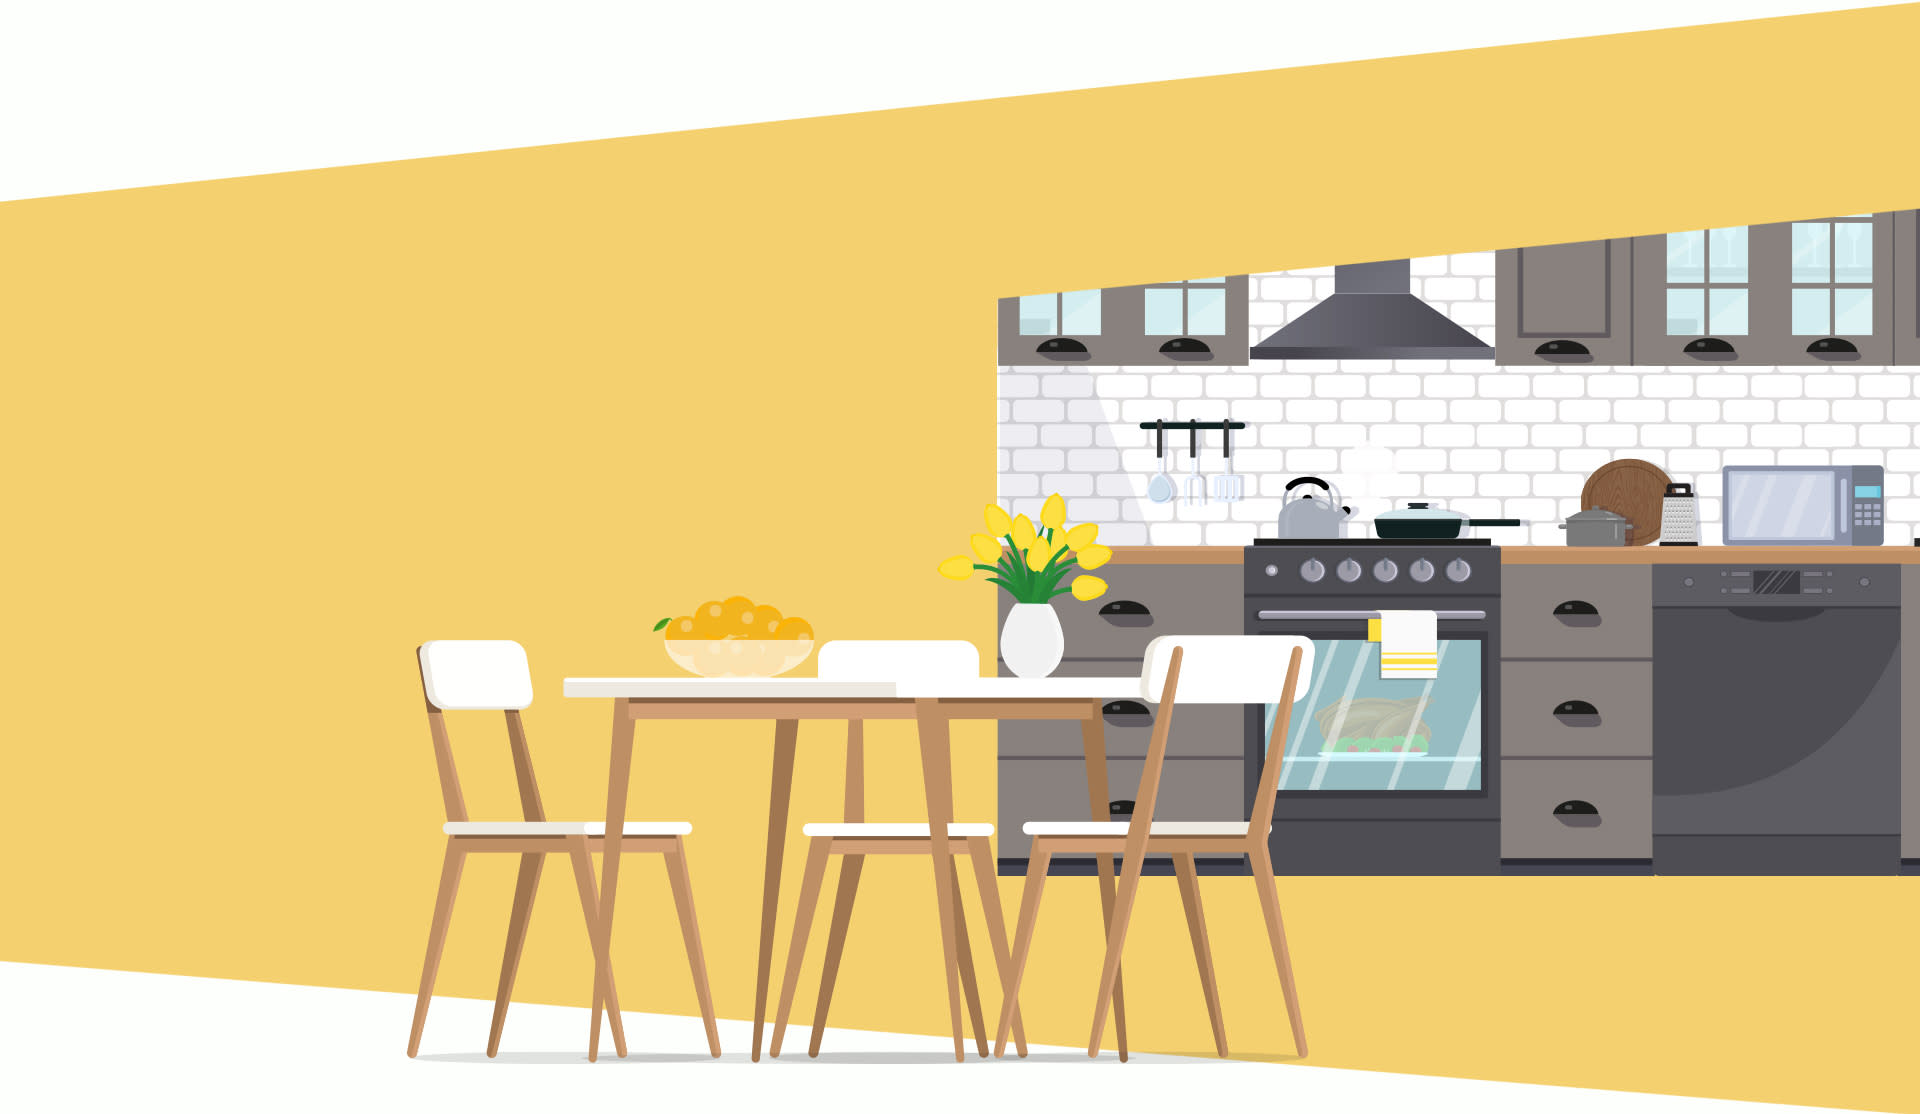 Flat design image of kitchen with yellow background